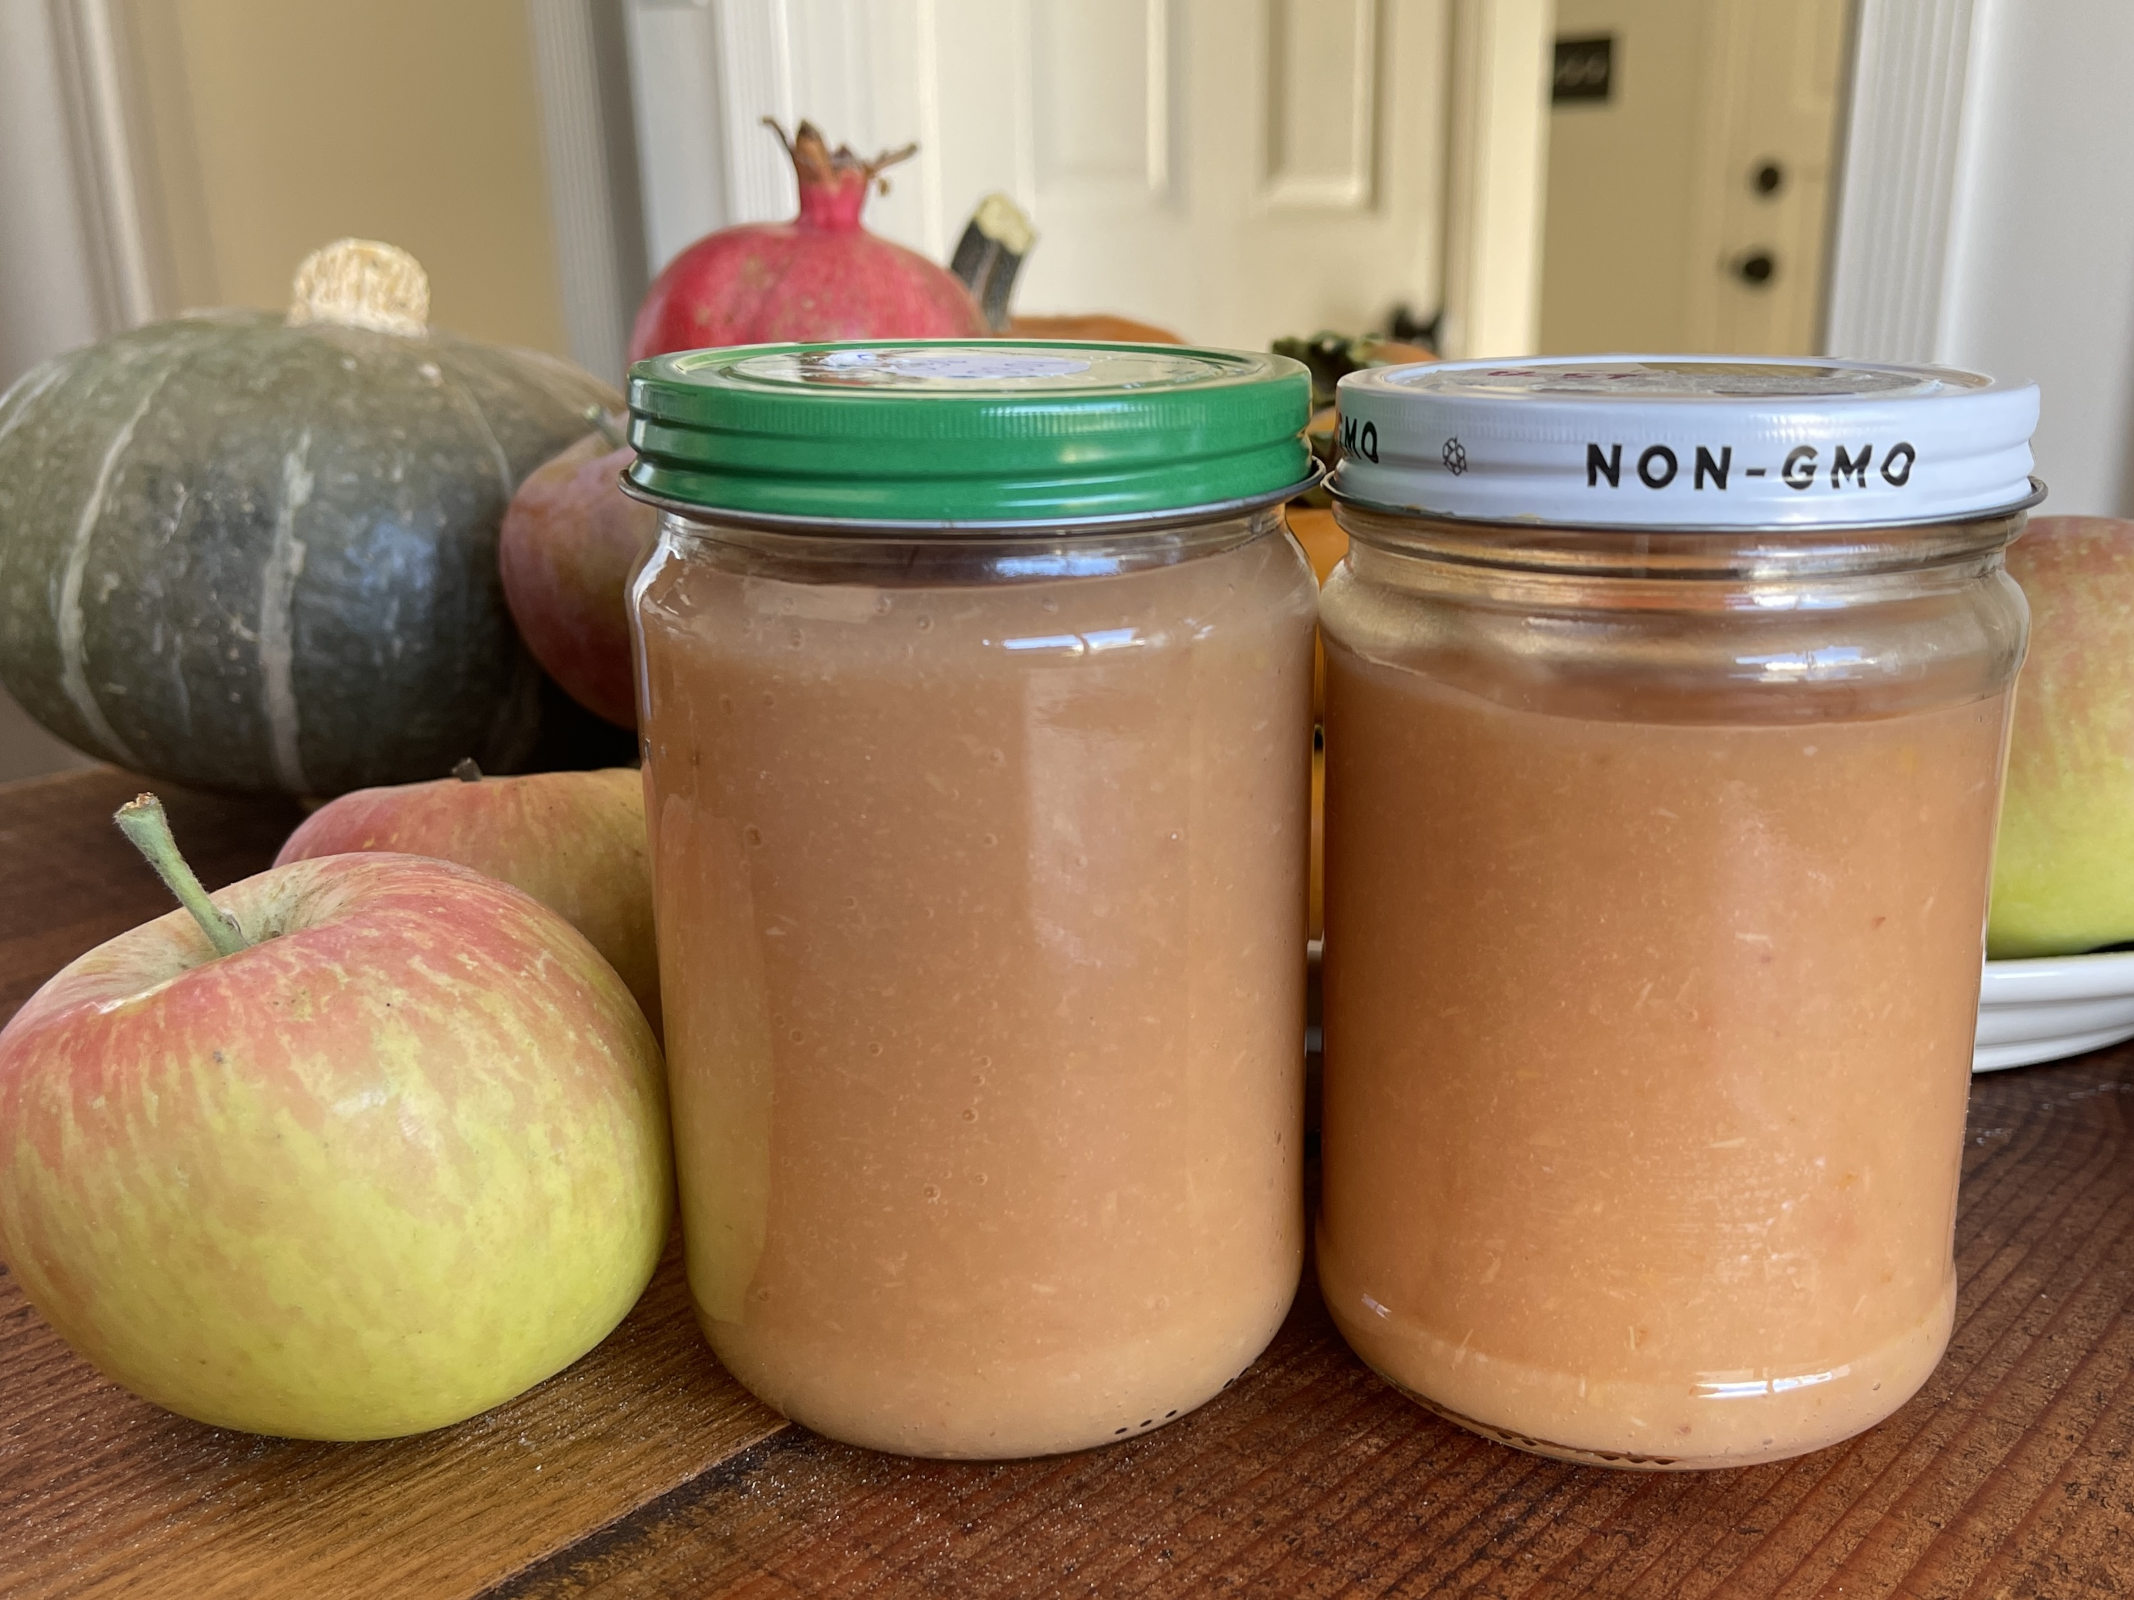 Two jars of applesauce sit on a wooden table, surrounded by fresh fall produce